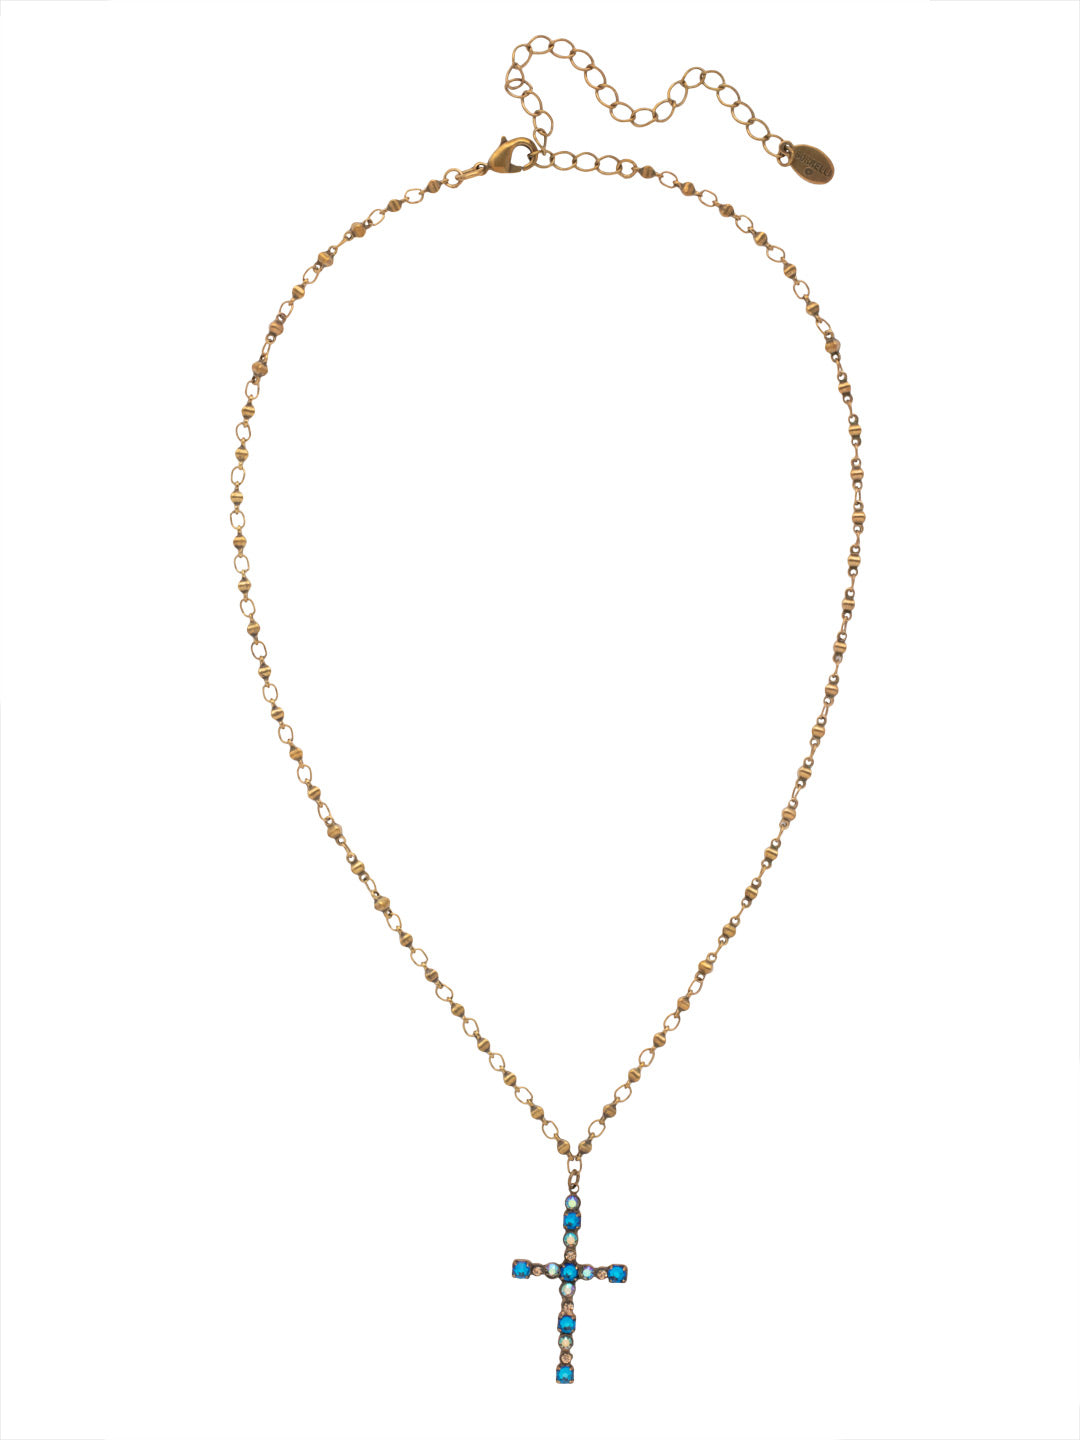 Charmaine Cross Pendant Necklace - NEX2AGVBN - <p>Perfect for any occasion, the Charmaine Cross Pendant Necklace spotlights a crystal studded cross on an adjustable chain. From Sorrelli's Venice Blue collection in our Antique Gold-tone finish.</p>